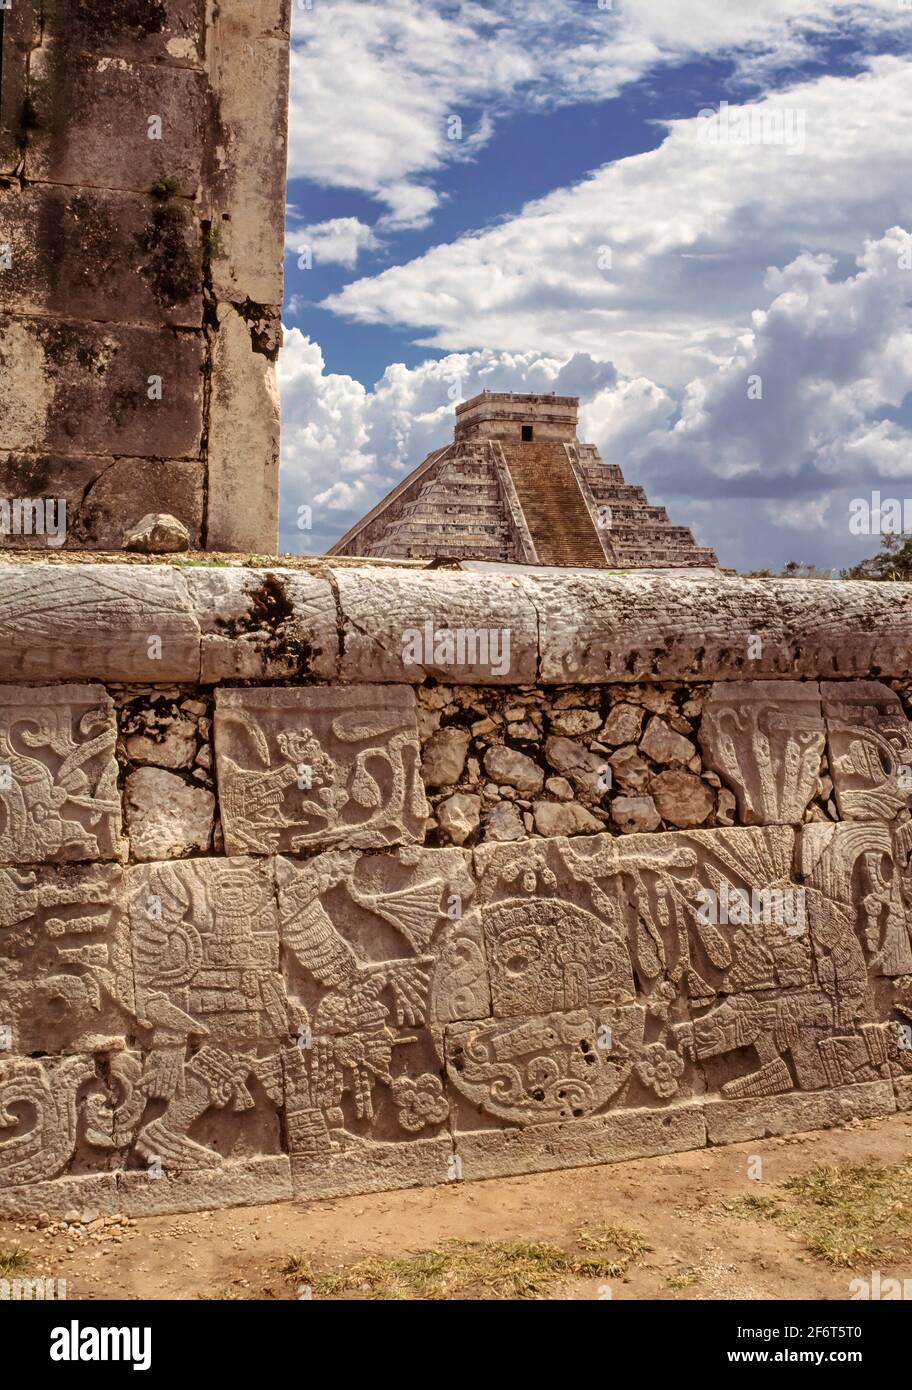 Ancient Mesoamerican players would have played a ball game using a rubber ball on a masonry field in an I-shaped court. Hoops on either side are Stock Photo